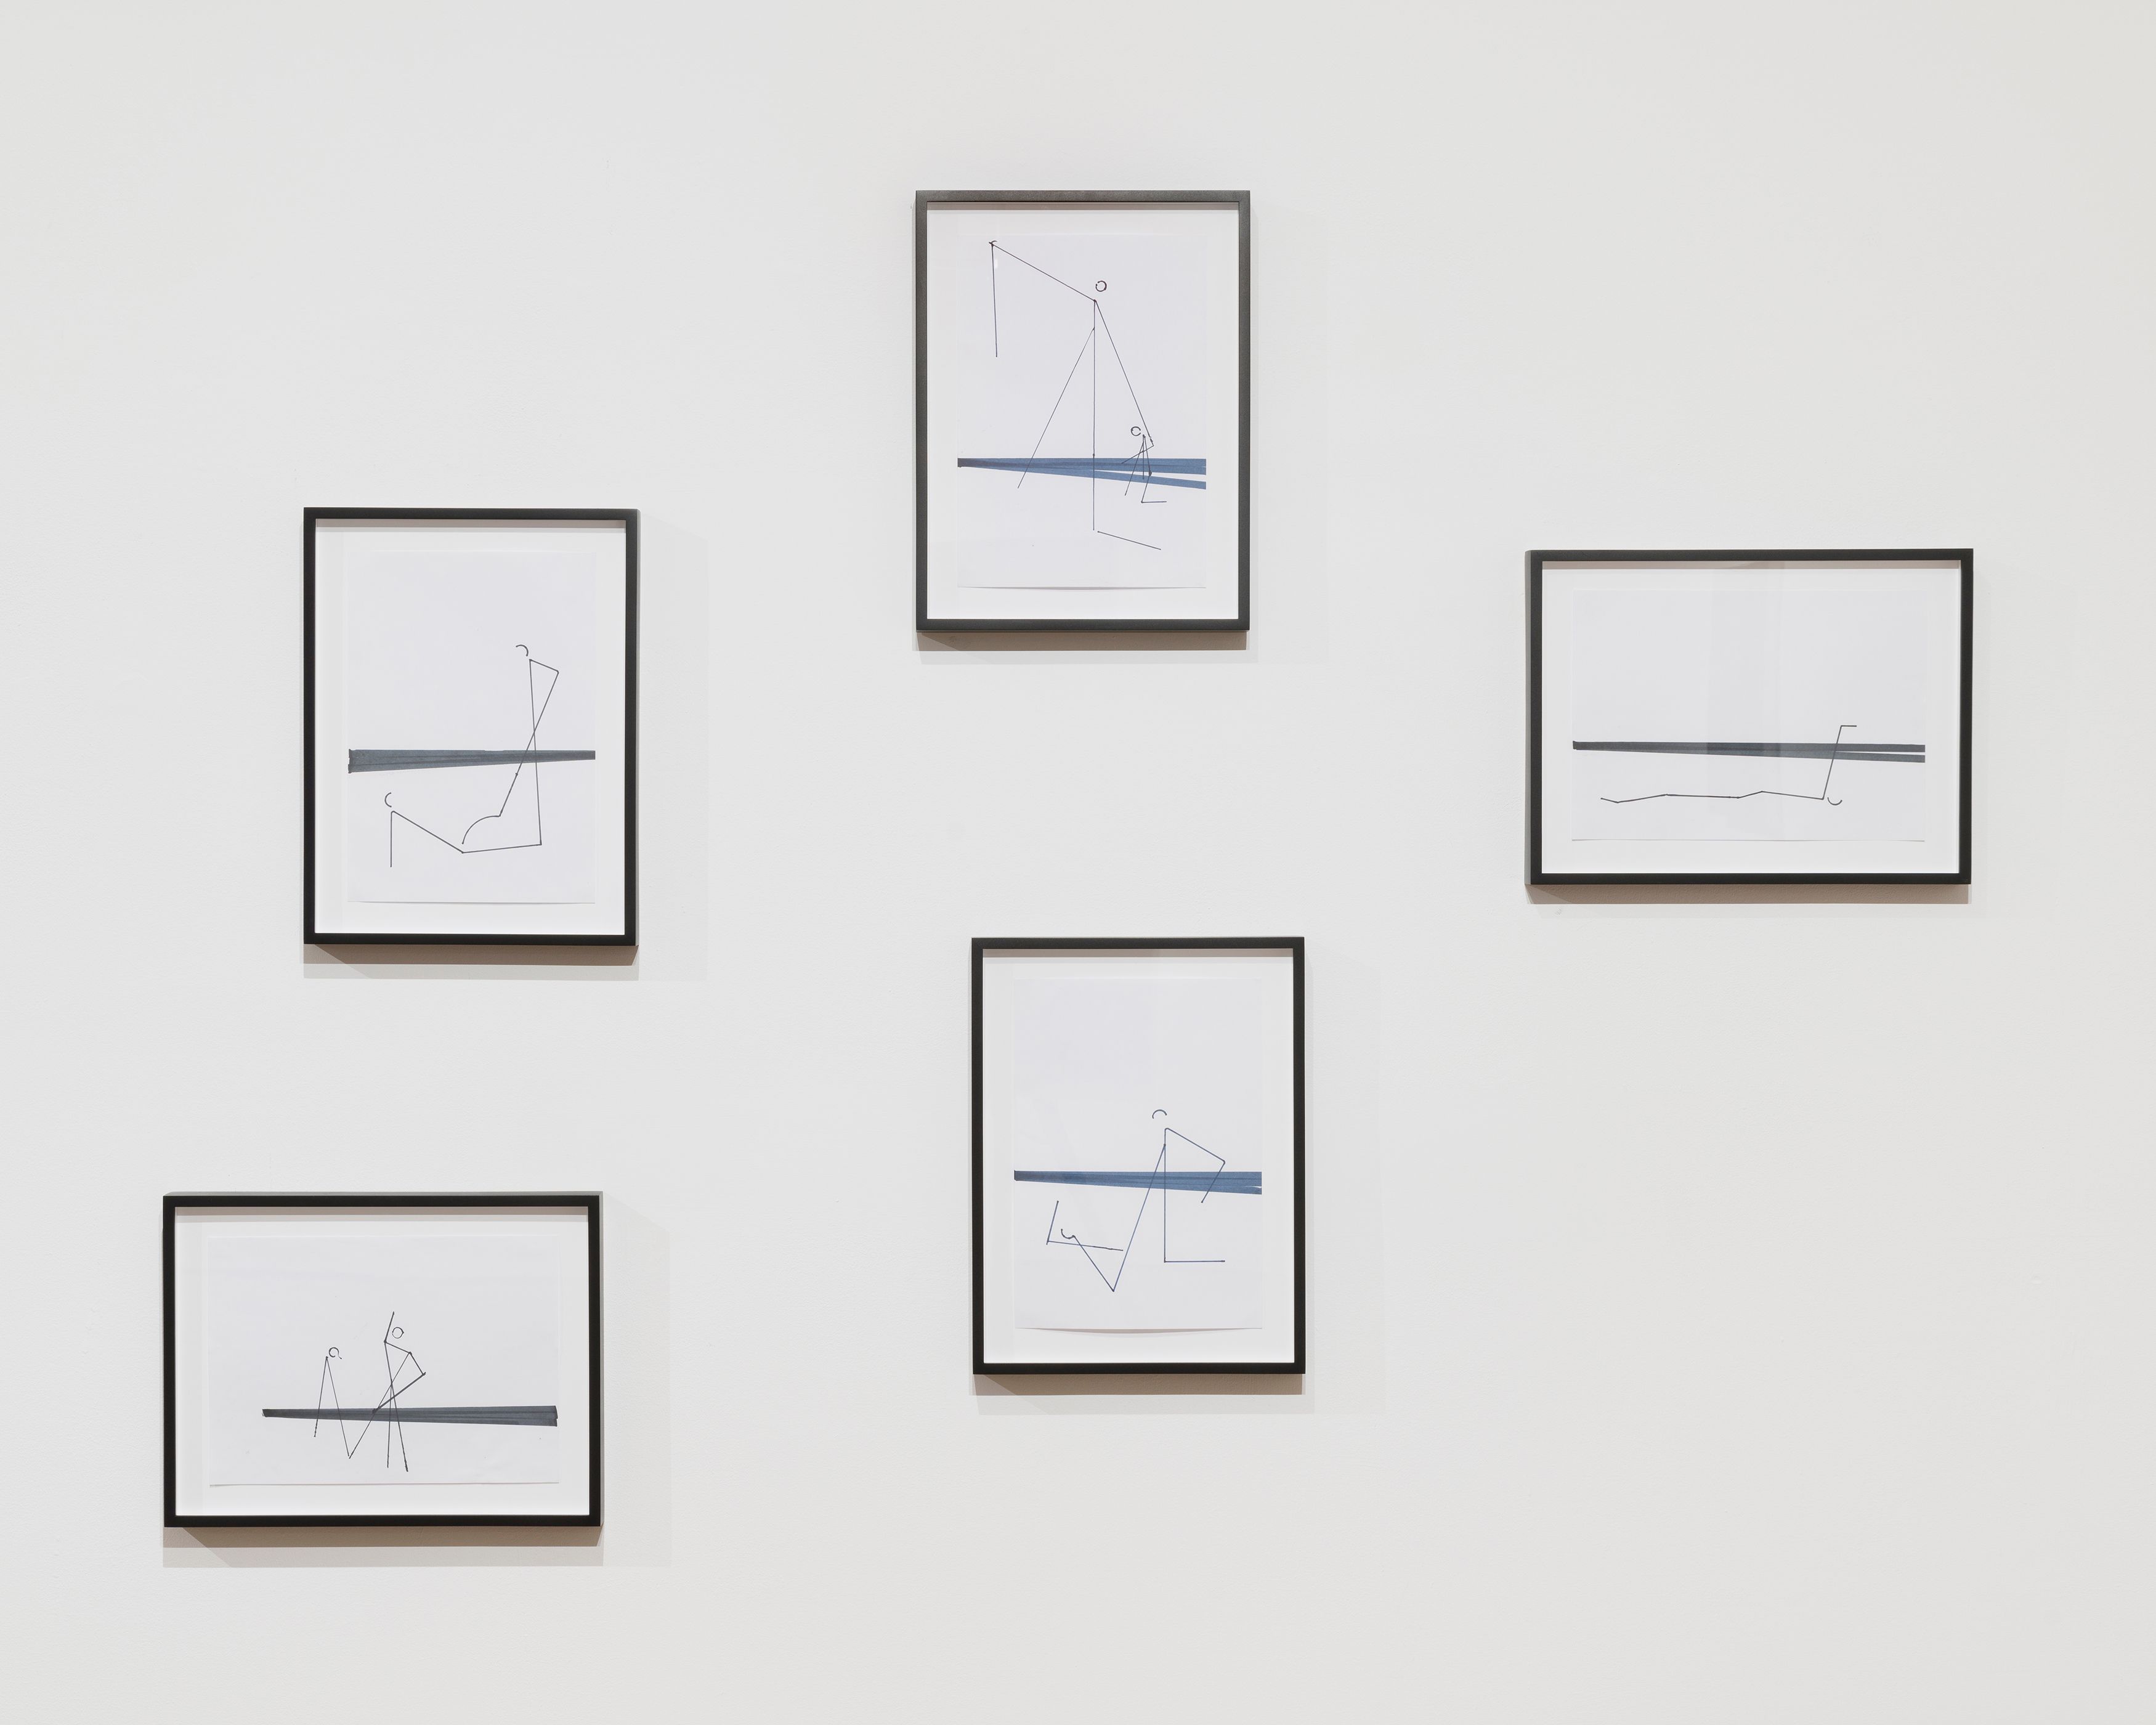 Rafal Bujnowski, Shadow on Paper, 2022, detail of ink on paper and digital image on a screen, 29.7 x 21 cm (11 5/8 x 8 1/4 in.) (each drawing), overall dimensions variable